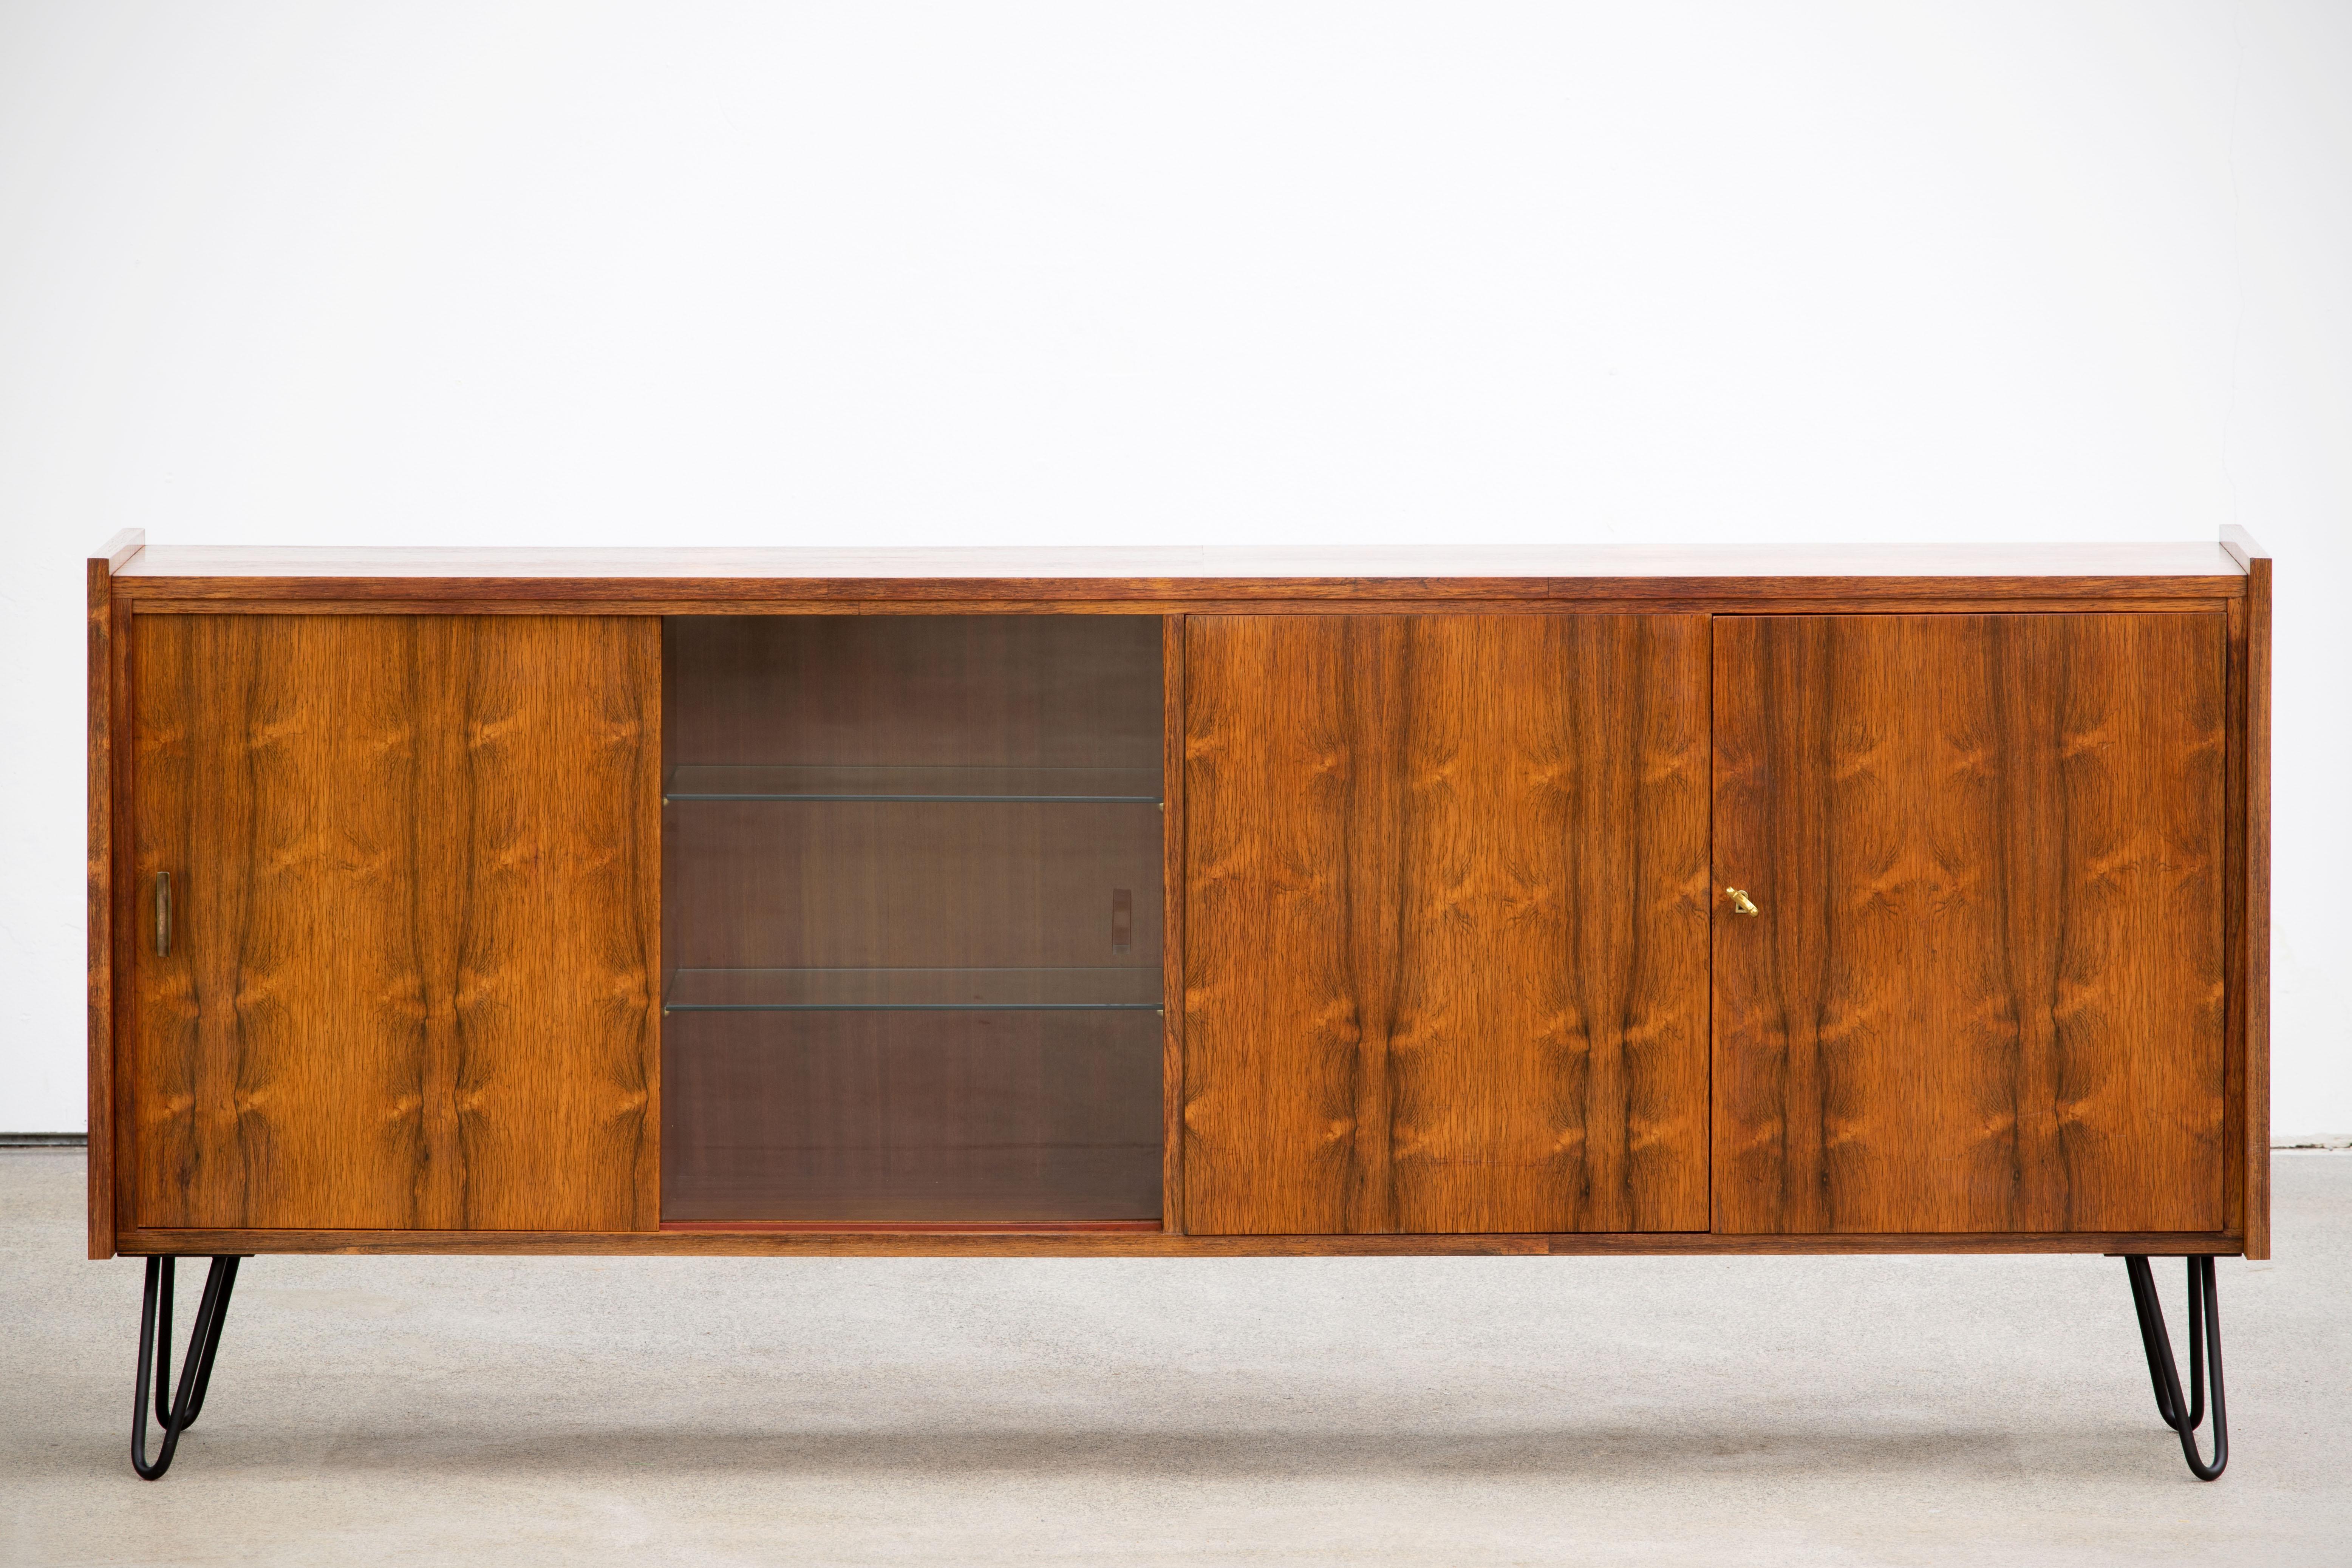 Midcentury sideboard from the 1960s. It is a shining example of the form and function synonymous with furniture of this era. It has is all, well-built, great design and heaviness. Four doors hiding storage space. The minimal design and the warm tone